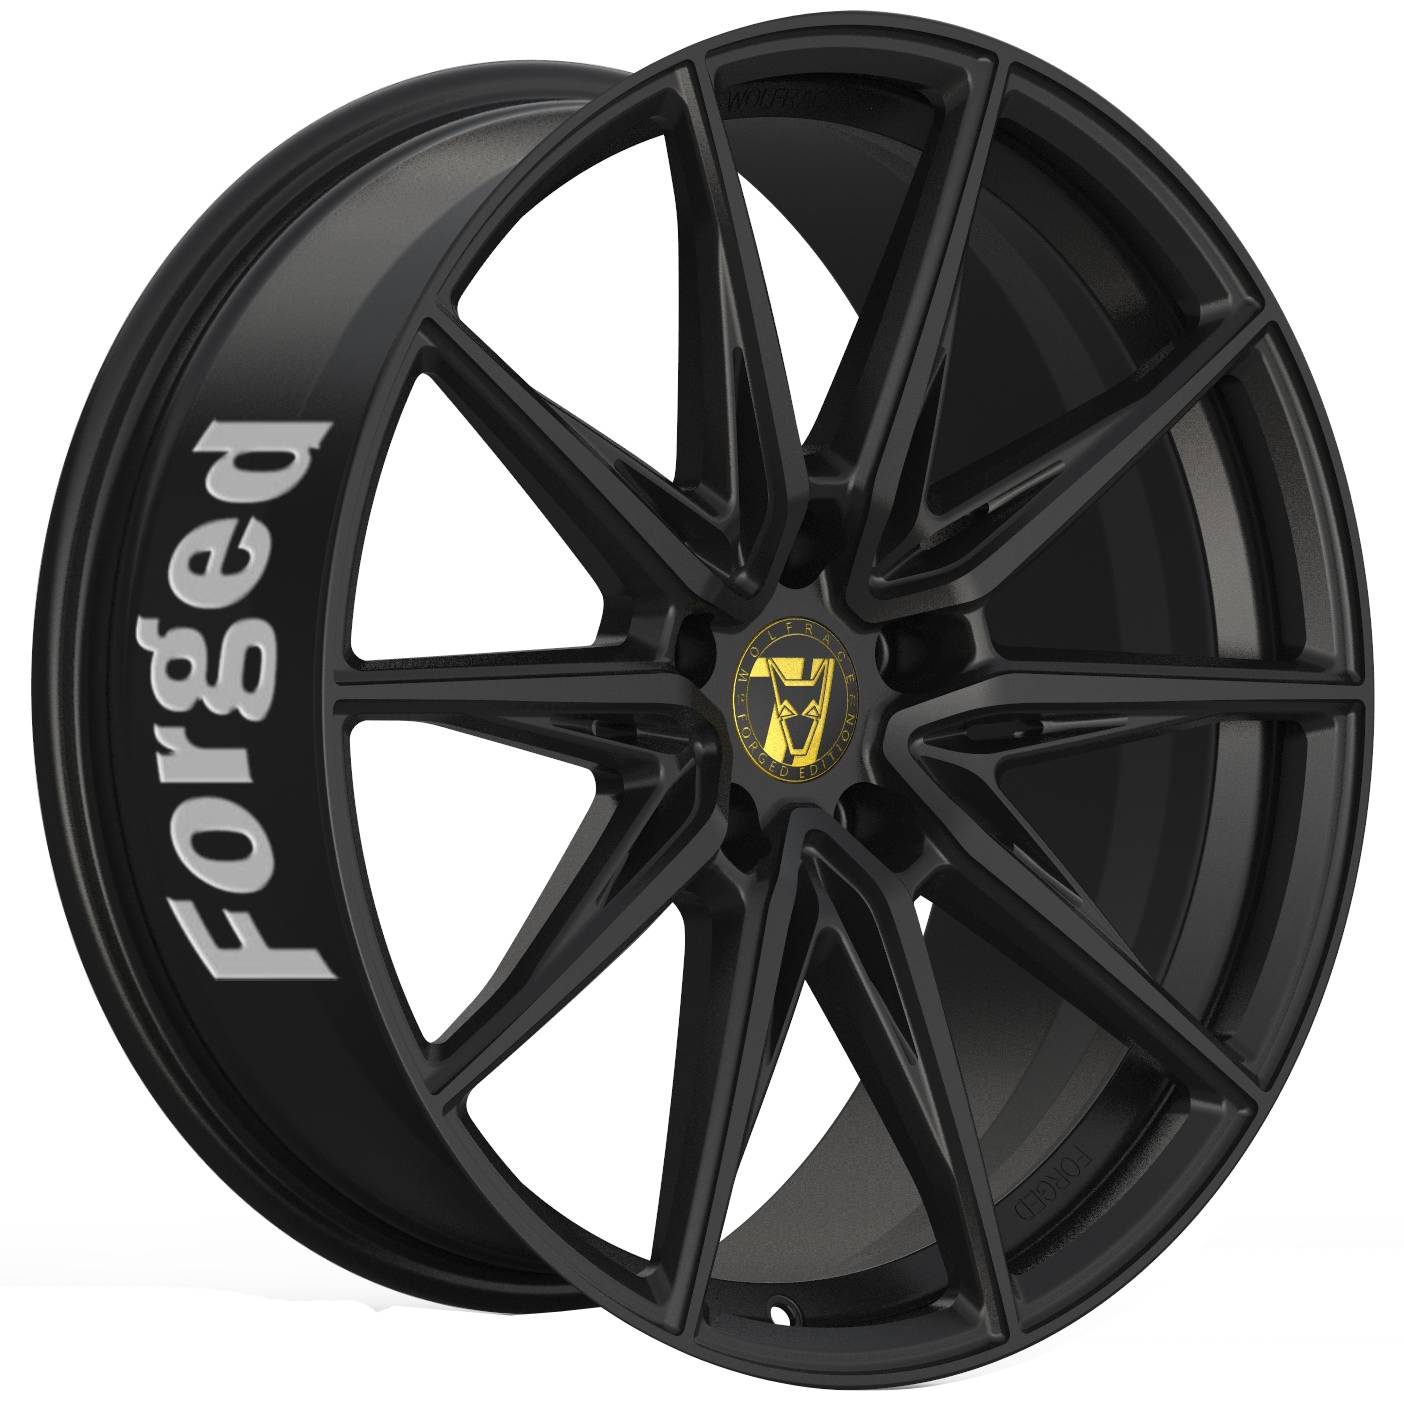 Demon Wheels 71 Forged Edition Urban Racer Forged [11x23] -5x115- ET 20